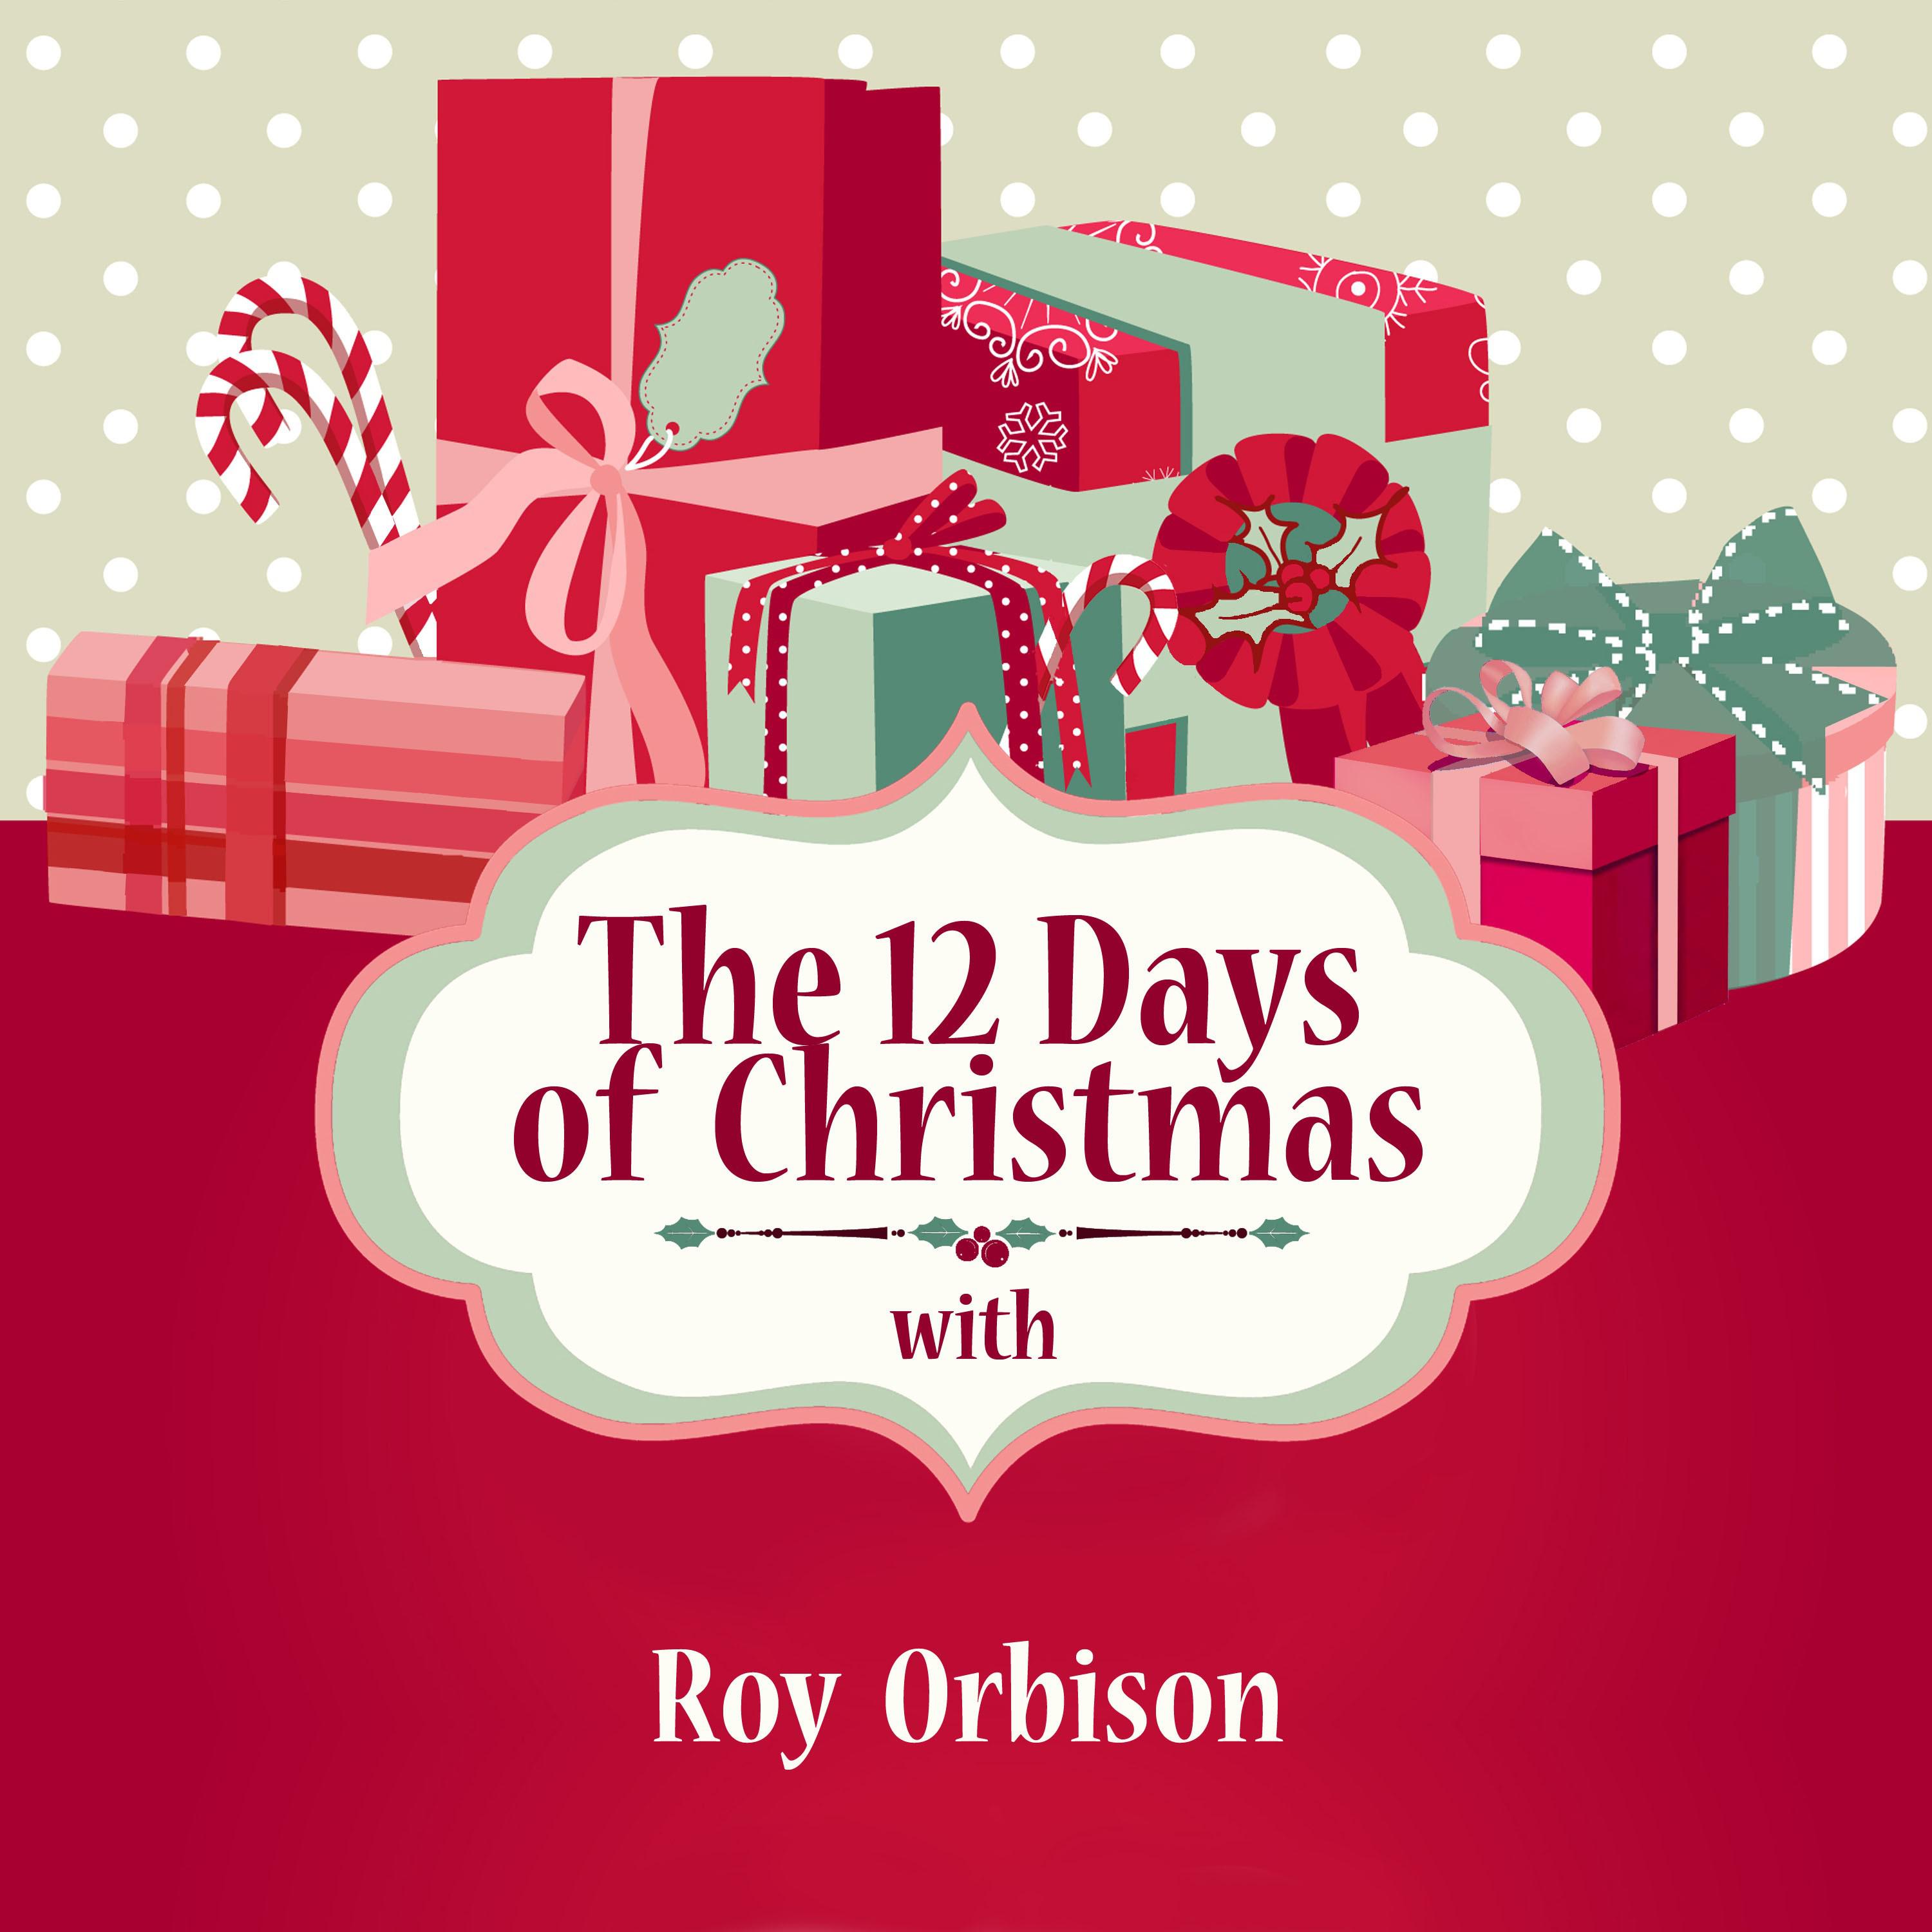 The 12 Days of Christmas with Roy Orbison